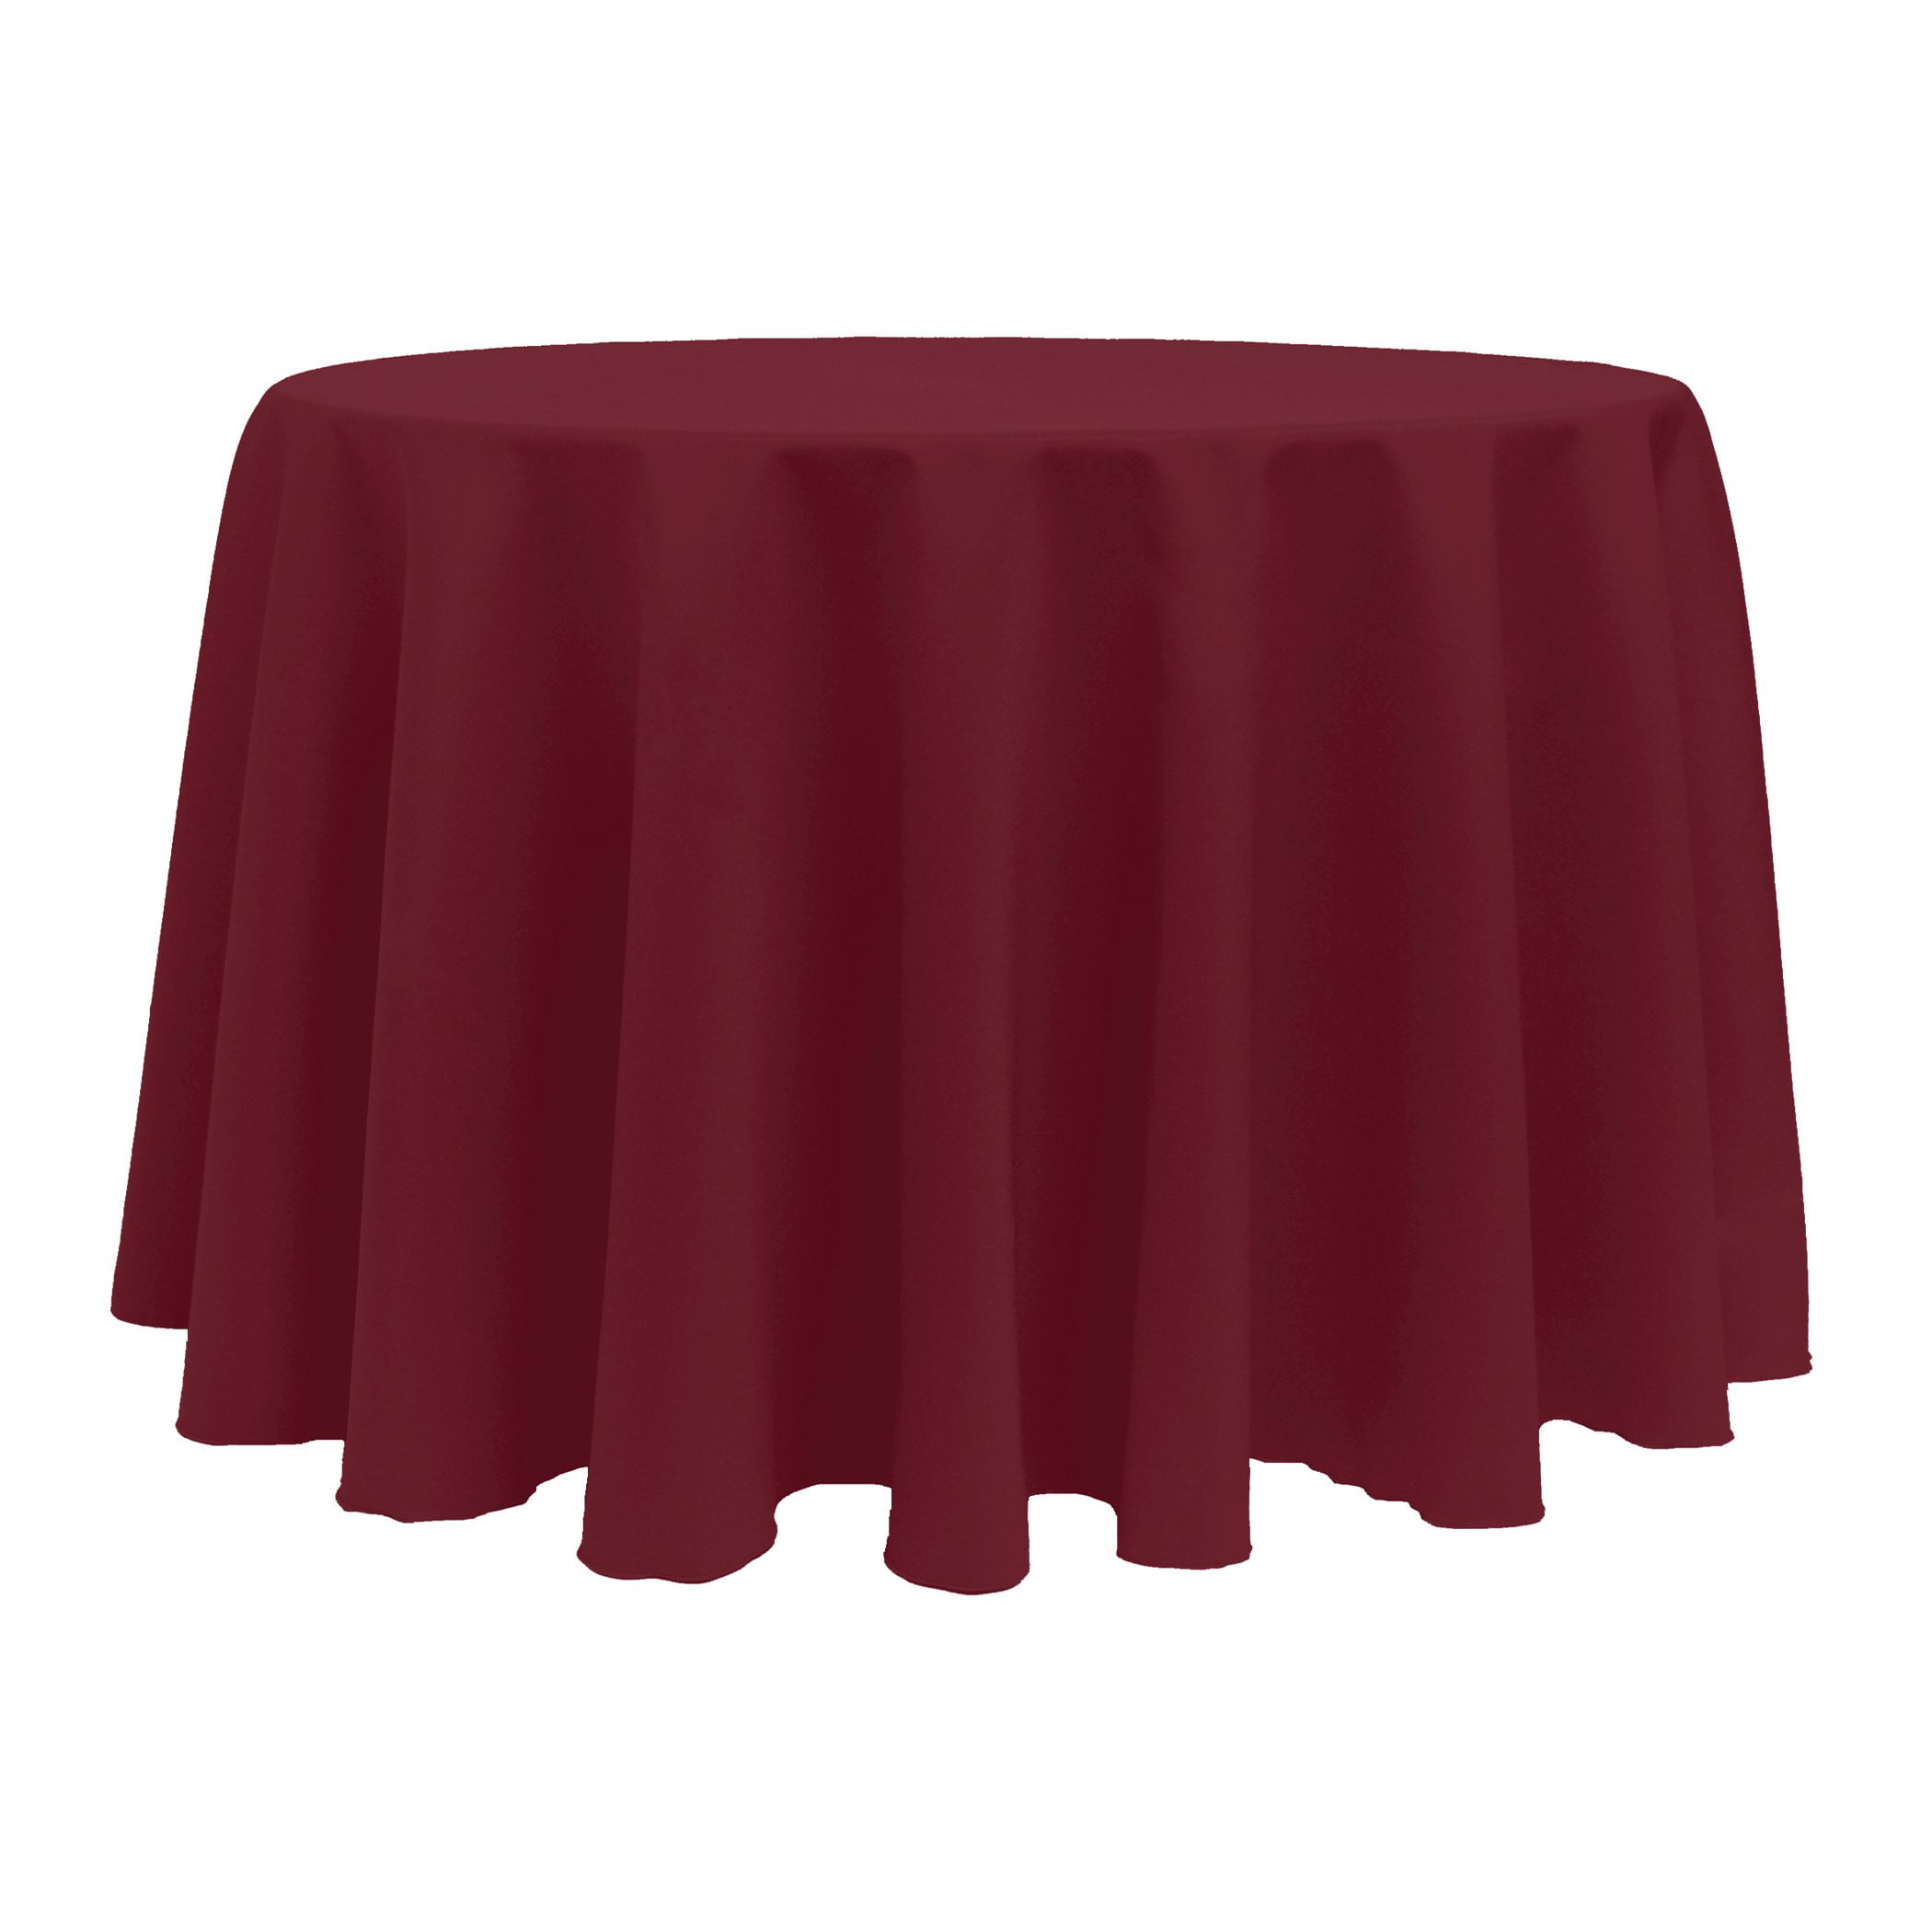 10 Pk 132 in Poly Round Seamless Tablecloth Wedding Party Banquet Restaurant 